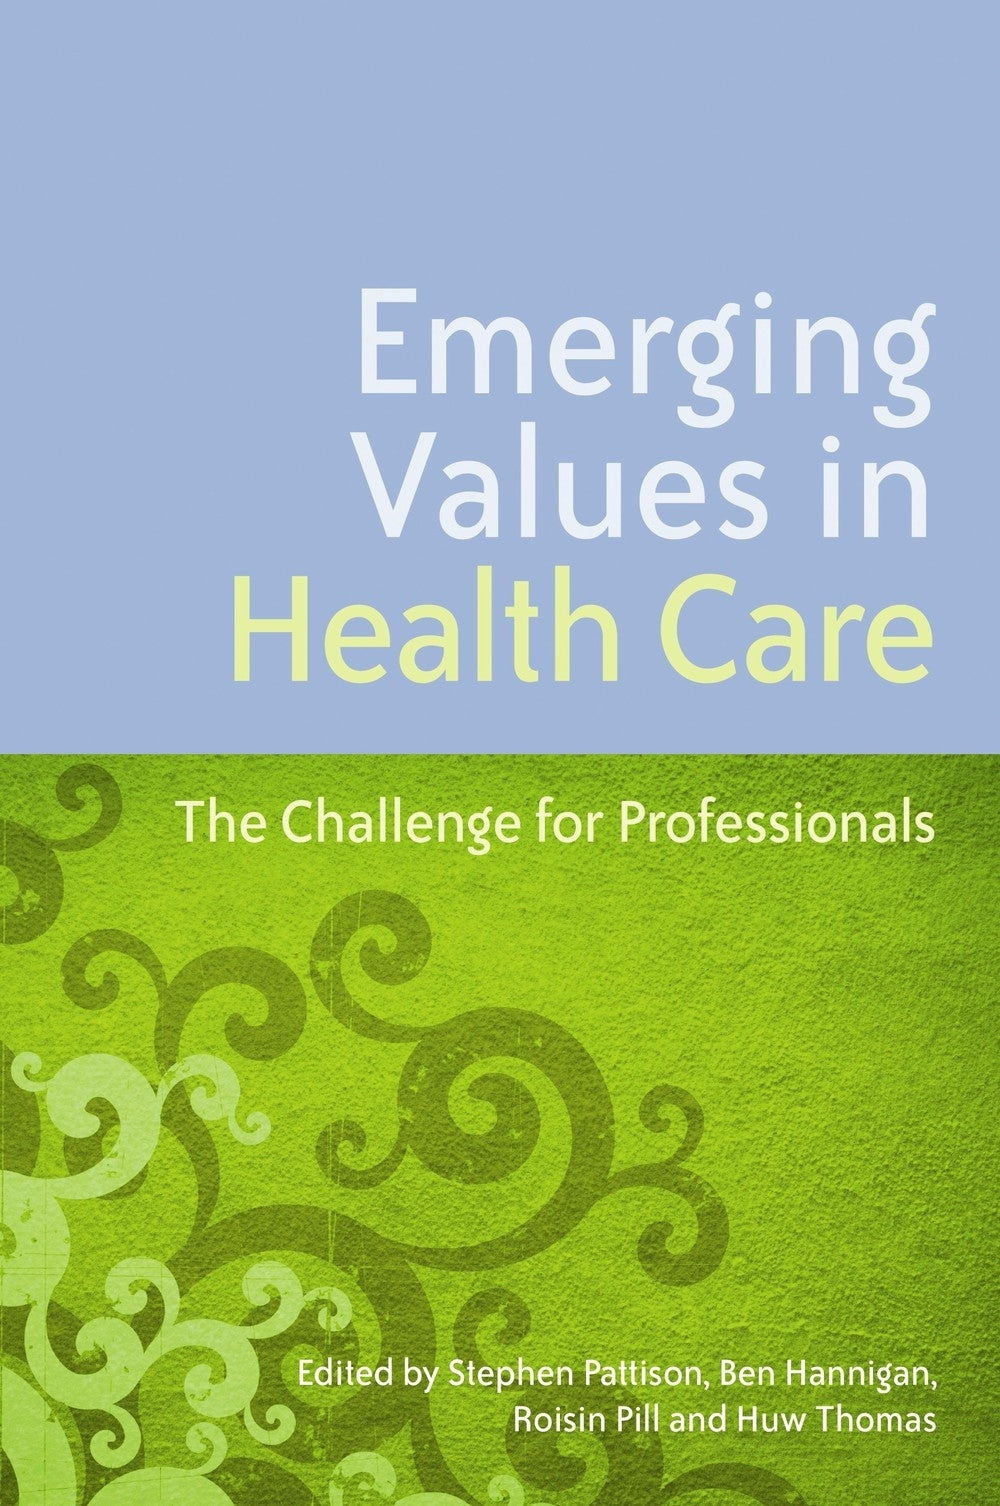 Emerging Values in Health Care by Stephen Pattison, Huw Thomas, Roisin Pill, Ben Hannigan, No Author Listed